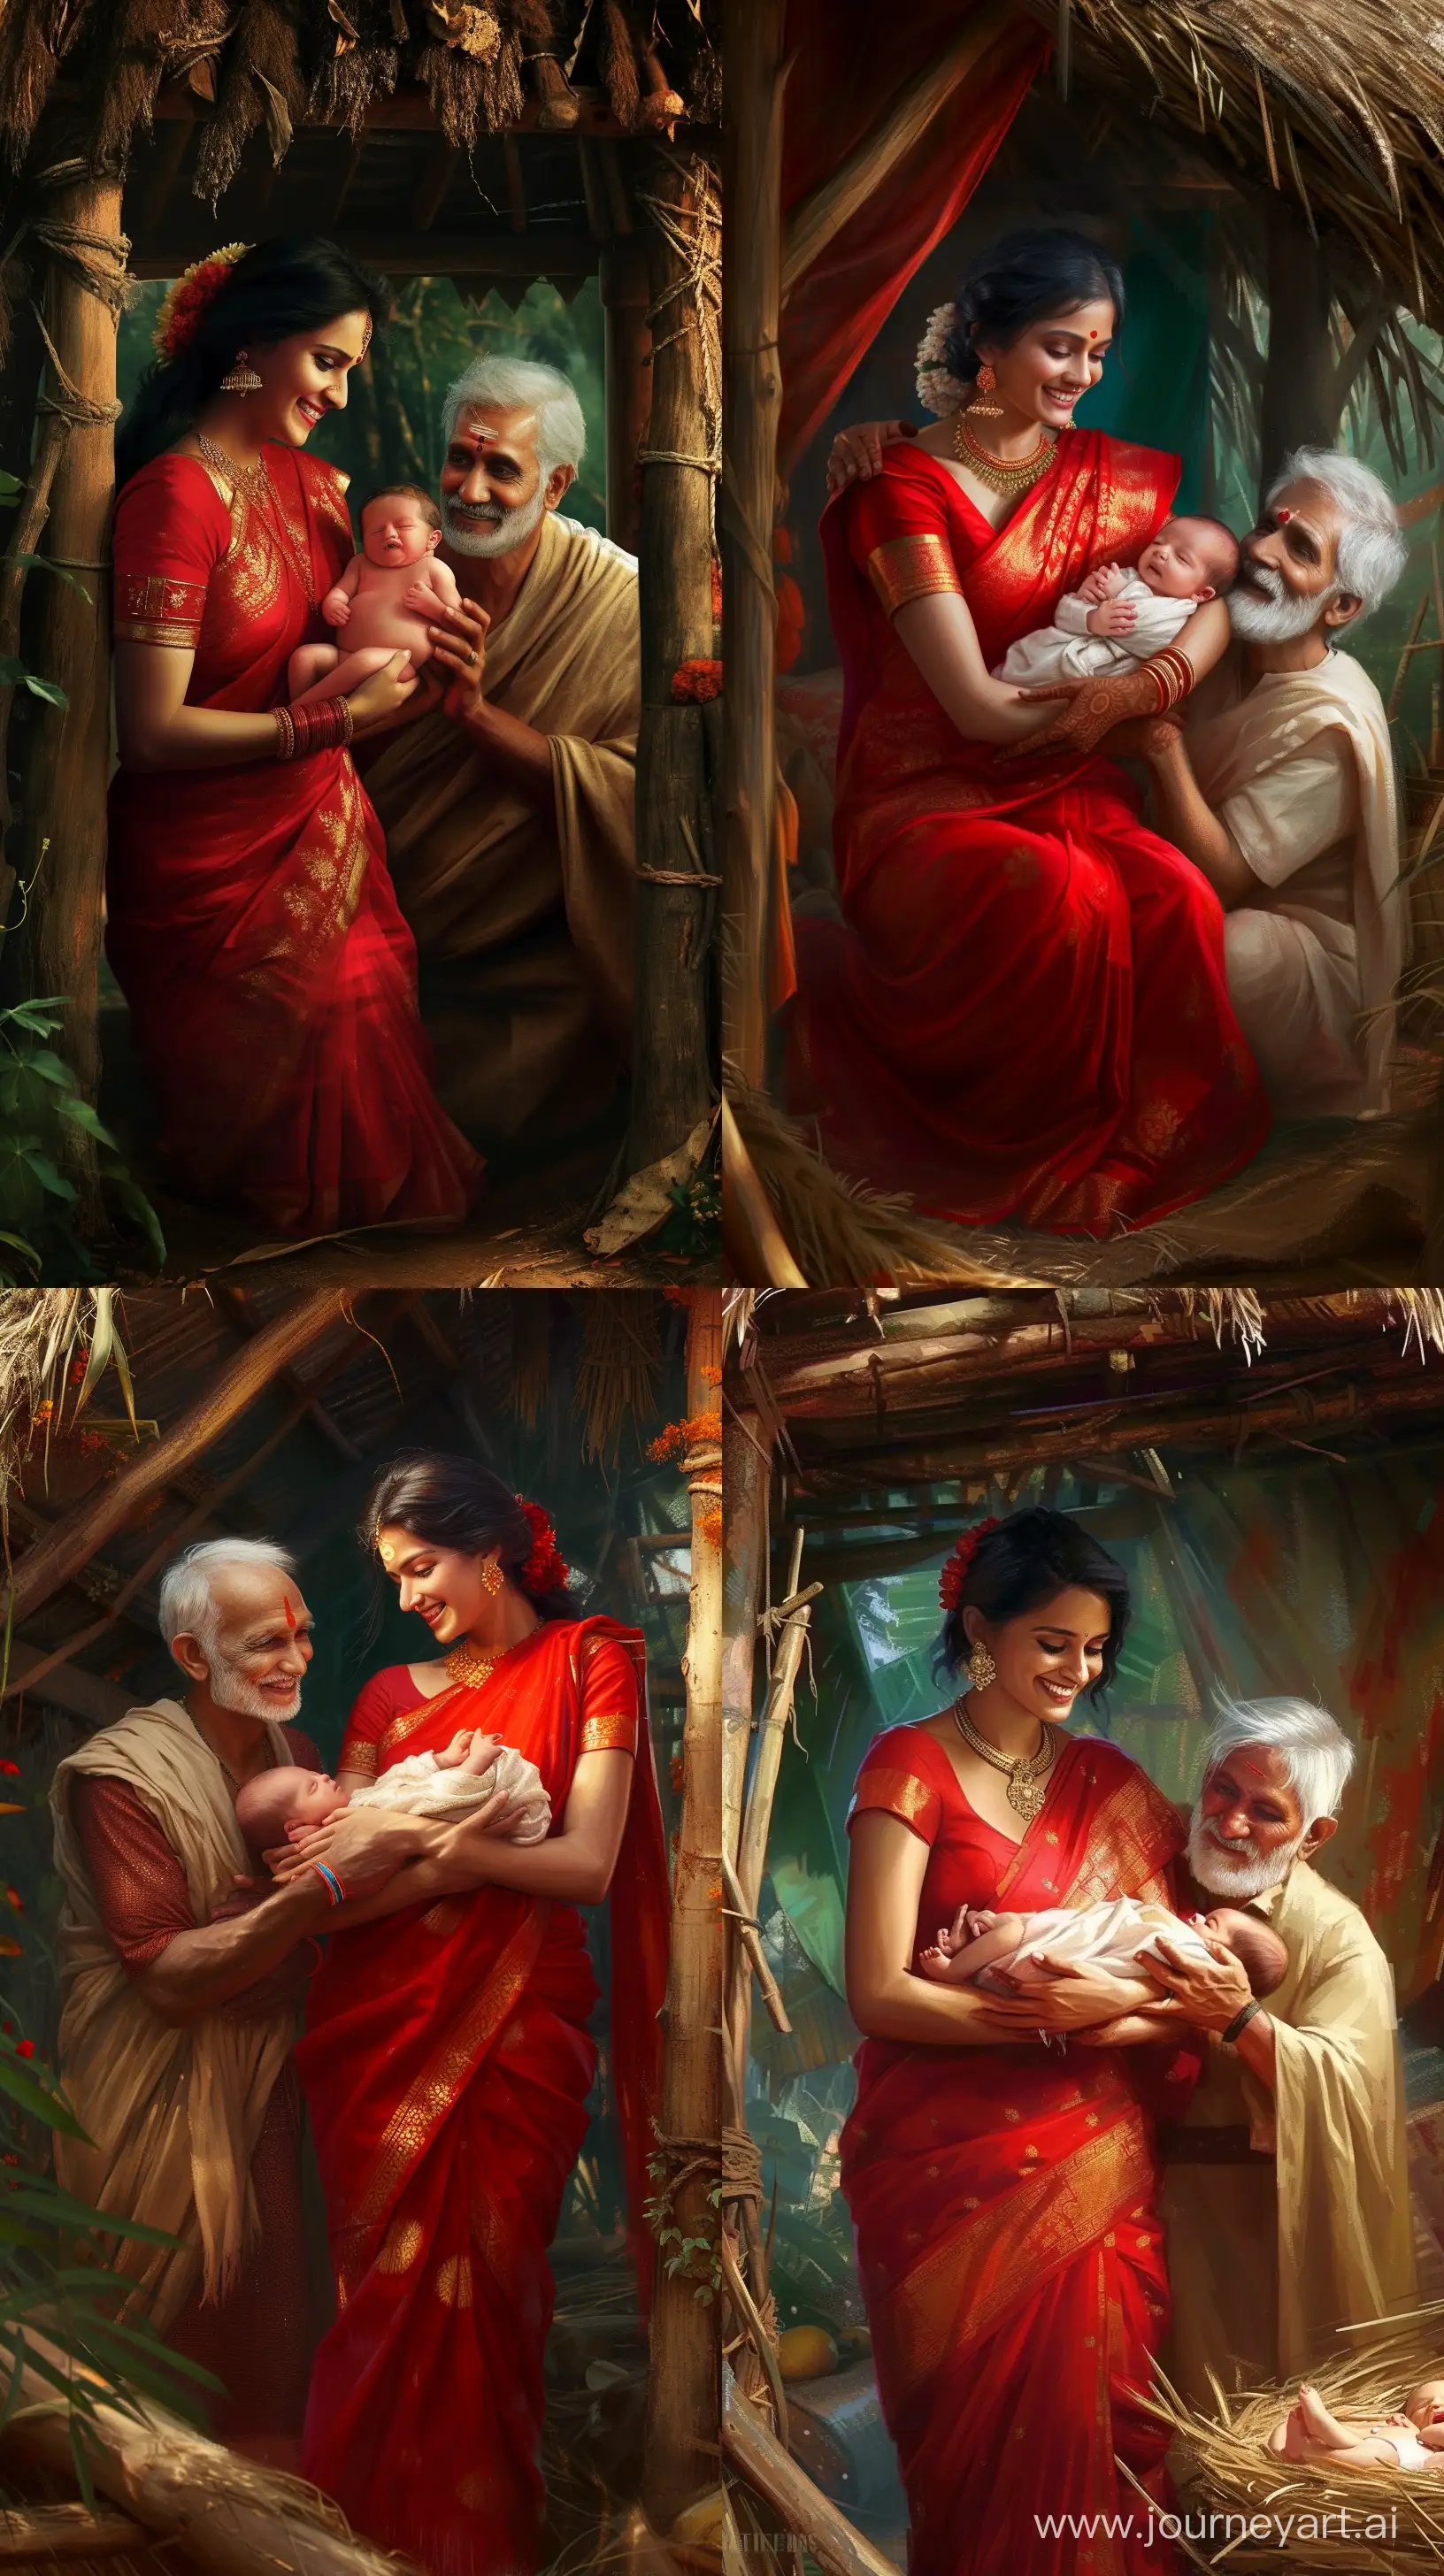 Joyful-Indian-Woman-in-Red-Saree-with-Newborn-Baby-and-Sage-in-Vibrant-Hut-Scene